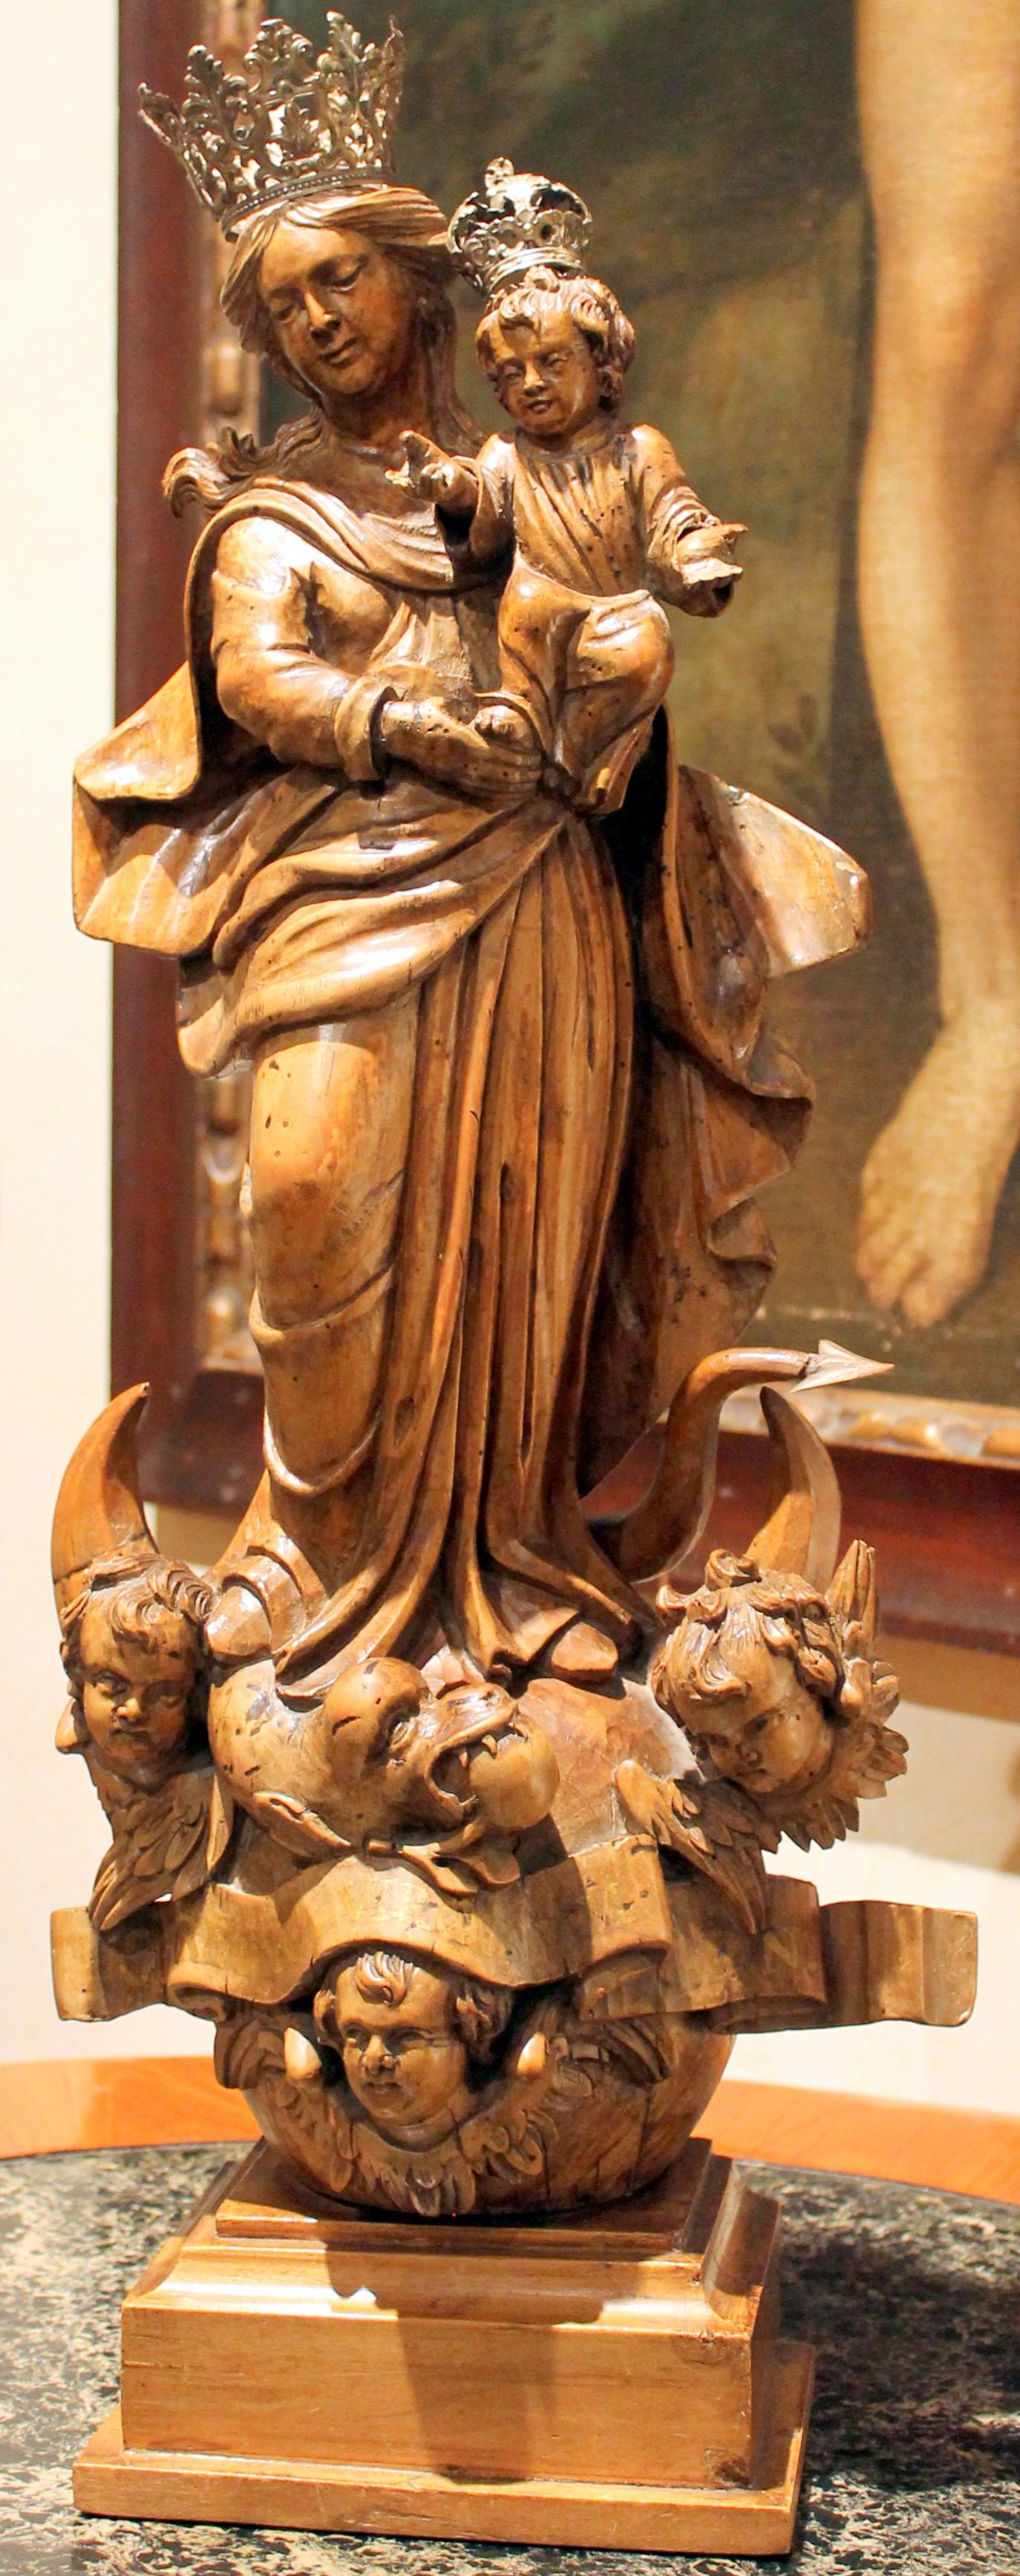 Extremely representative Northern Italian school hand carved wooden sculpture from early 18th century featuring a serene Madonna with child standing above the terrestrial globe and crescent moon.
This solid lime wood sculpture of a crowned Virgin